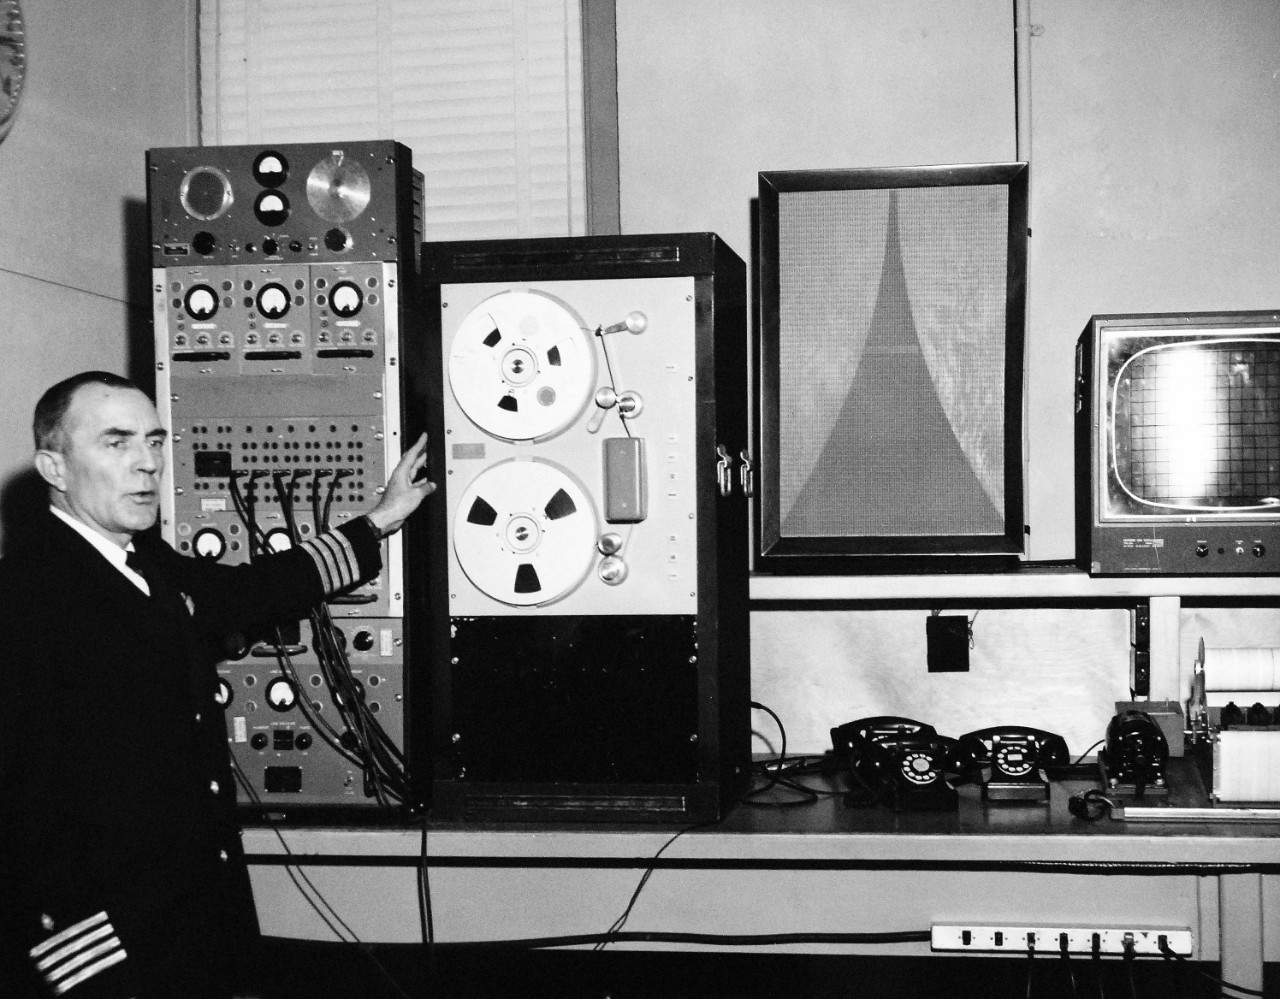 330-PS-8850-1:  U.S. Navy Conducts Physical Study By Telephone.  Captain Norman Les Barr, MC, USN, explains the functions of the equipment used in transmitting physiological information, March 21, 1958.  Official Department of Defense photograph, now in the collection of the National Archives.   